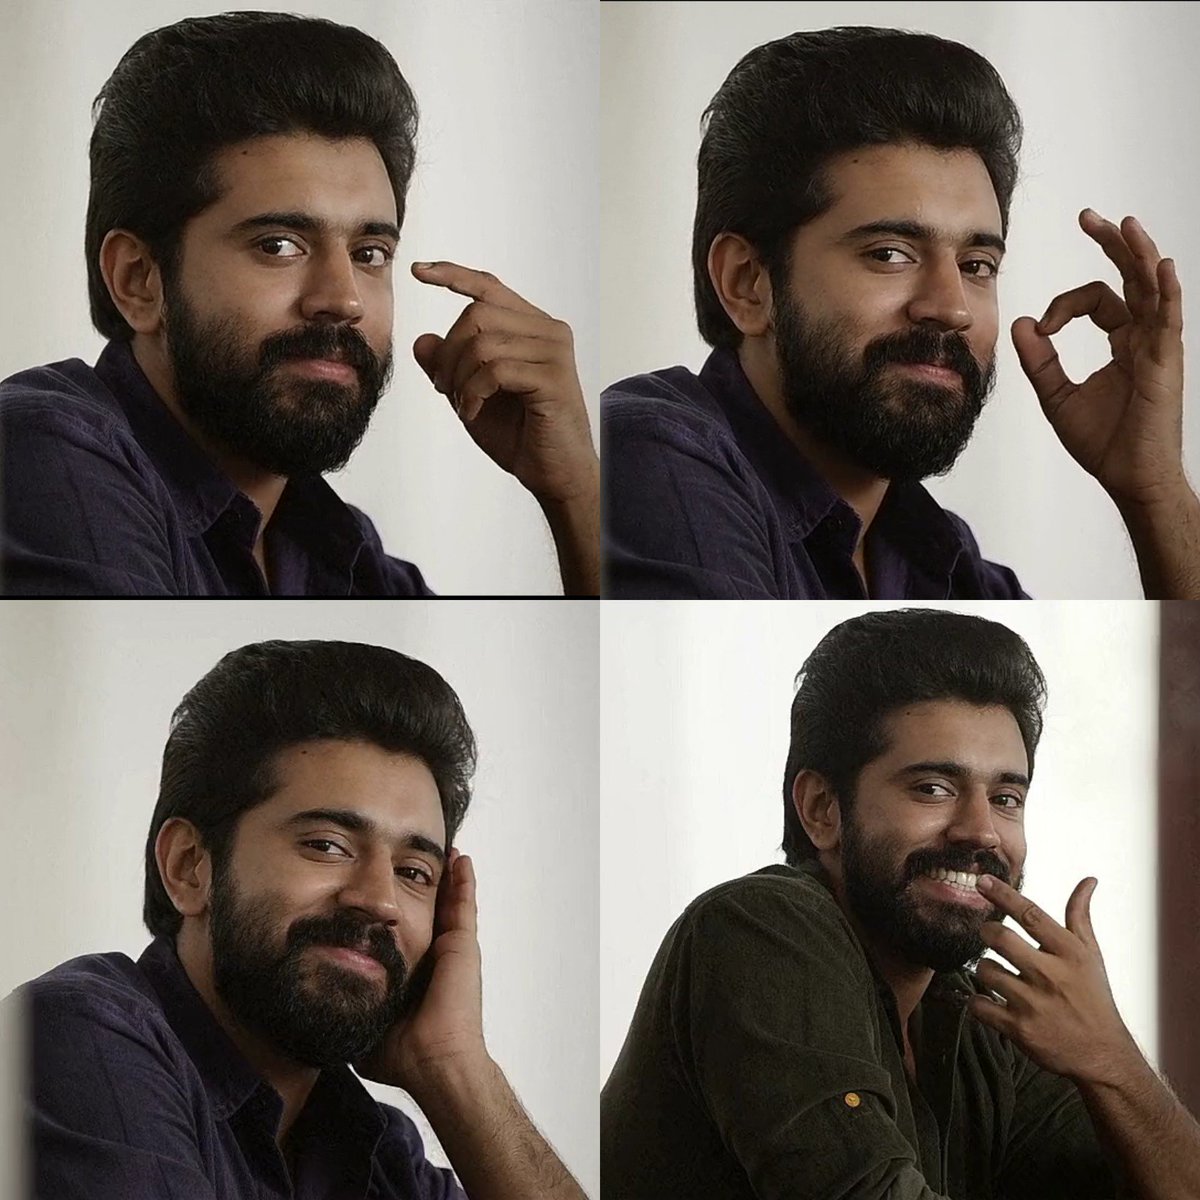 Wishing the handsome hunk and an amazing actor a very Happy Birthday @NivinOfficial ❤😍

My love towards mollywood started after seeing your films! 💖 #NivinPauly 

#HappyBirthdayNivinPauly
#NivinPaulyBdayFest